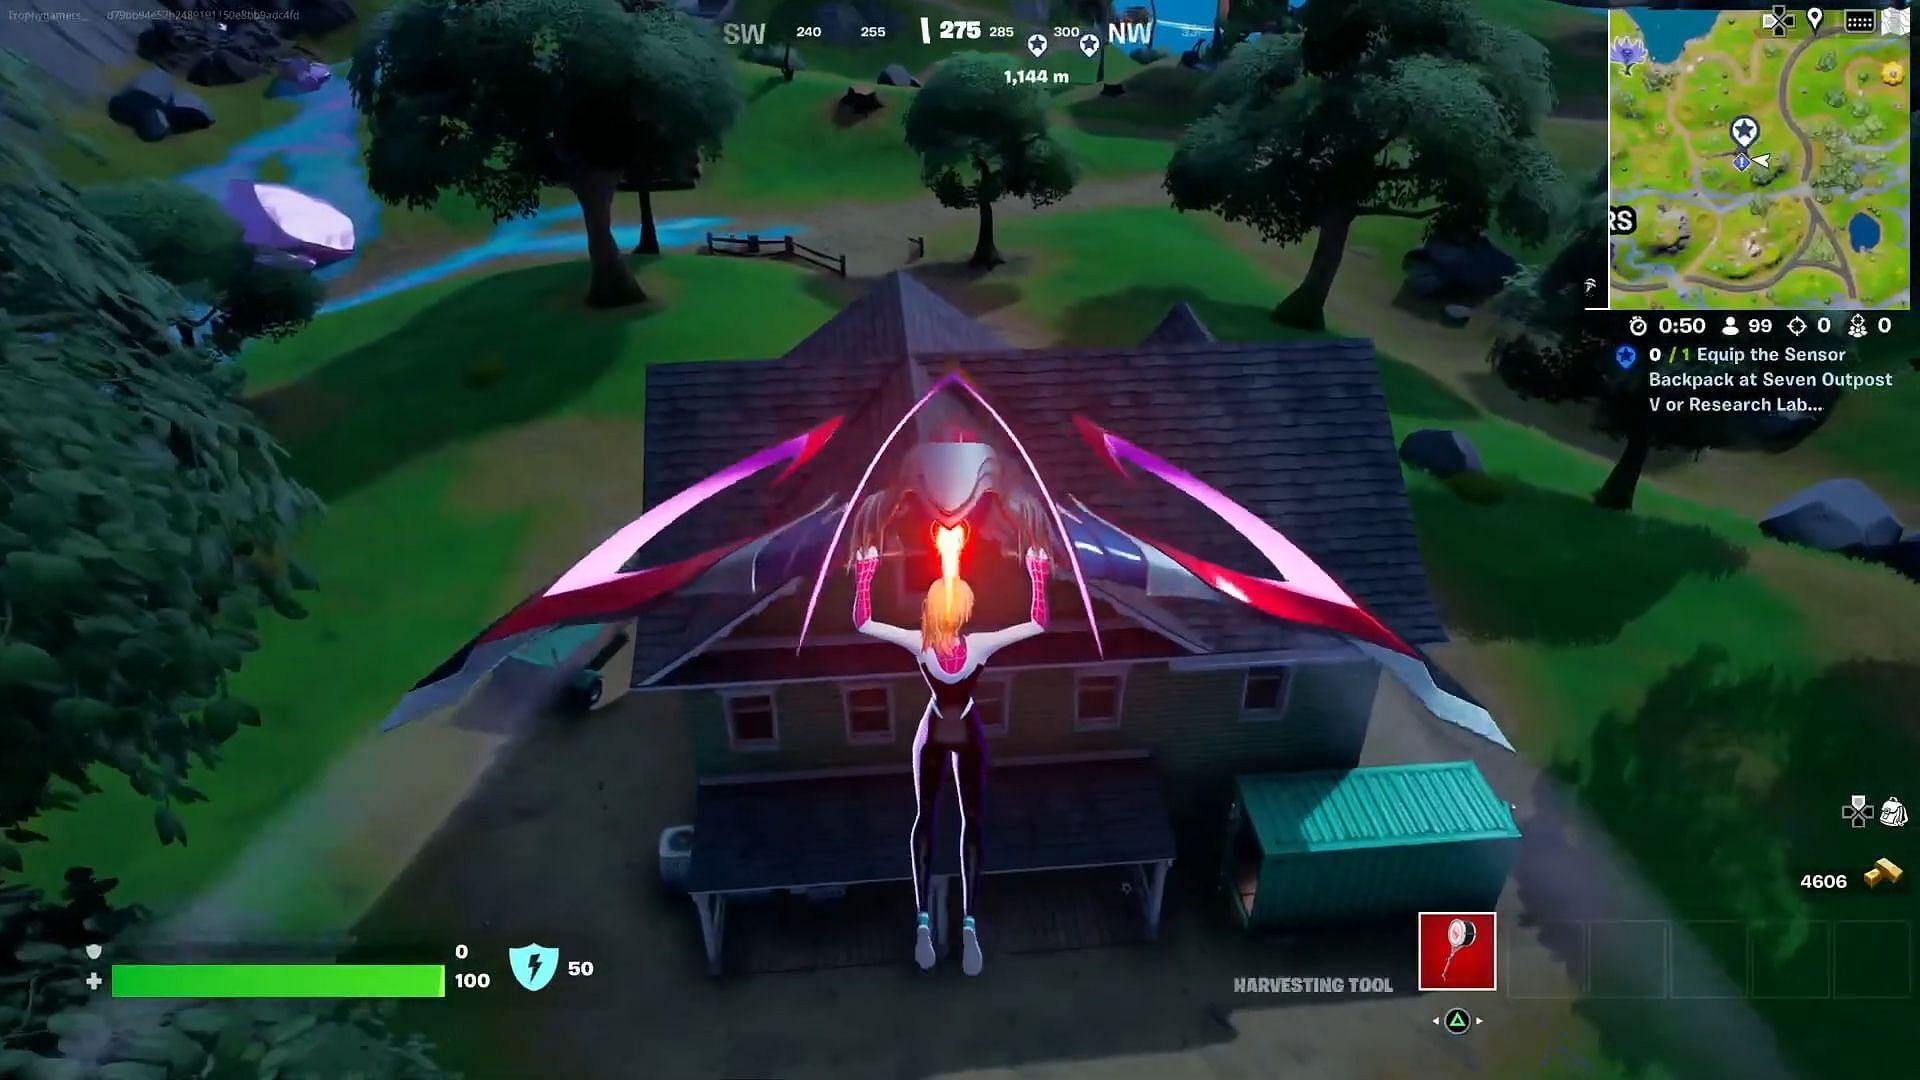 To record energy signatures around Loot Lake, you should land in the area (Image via Epic Games)